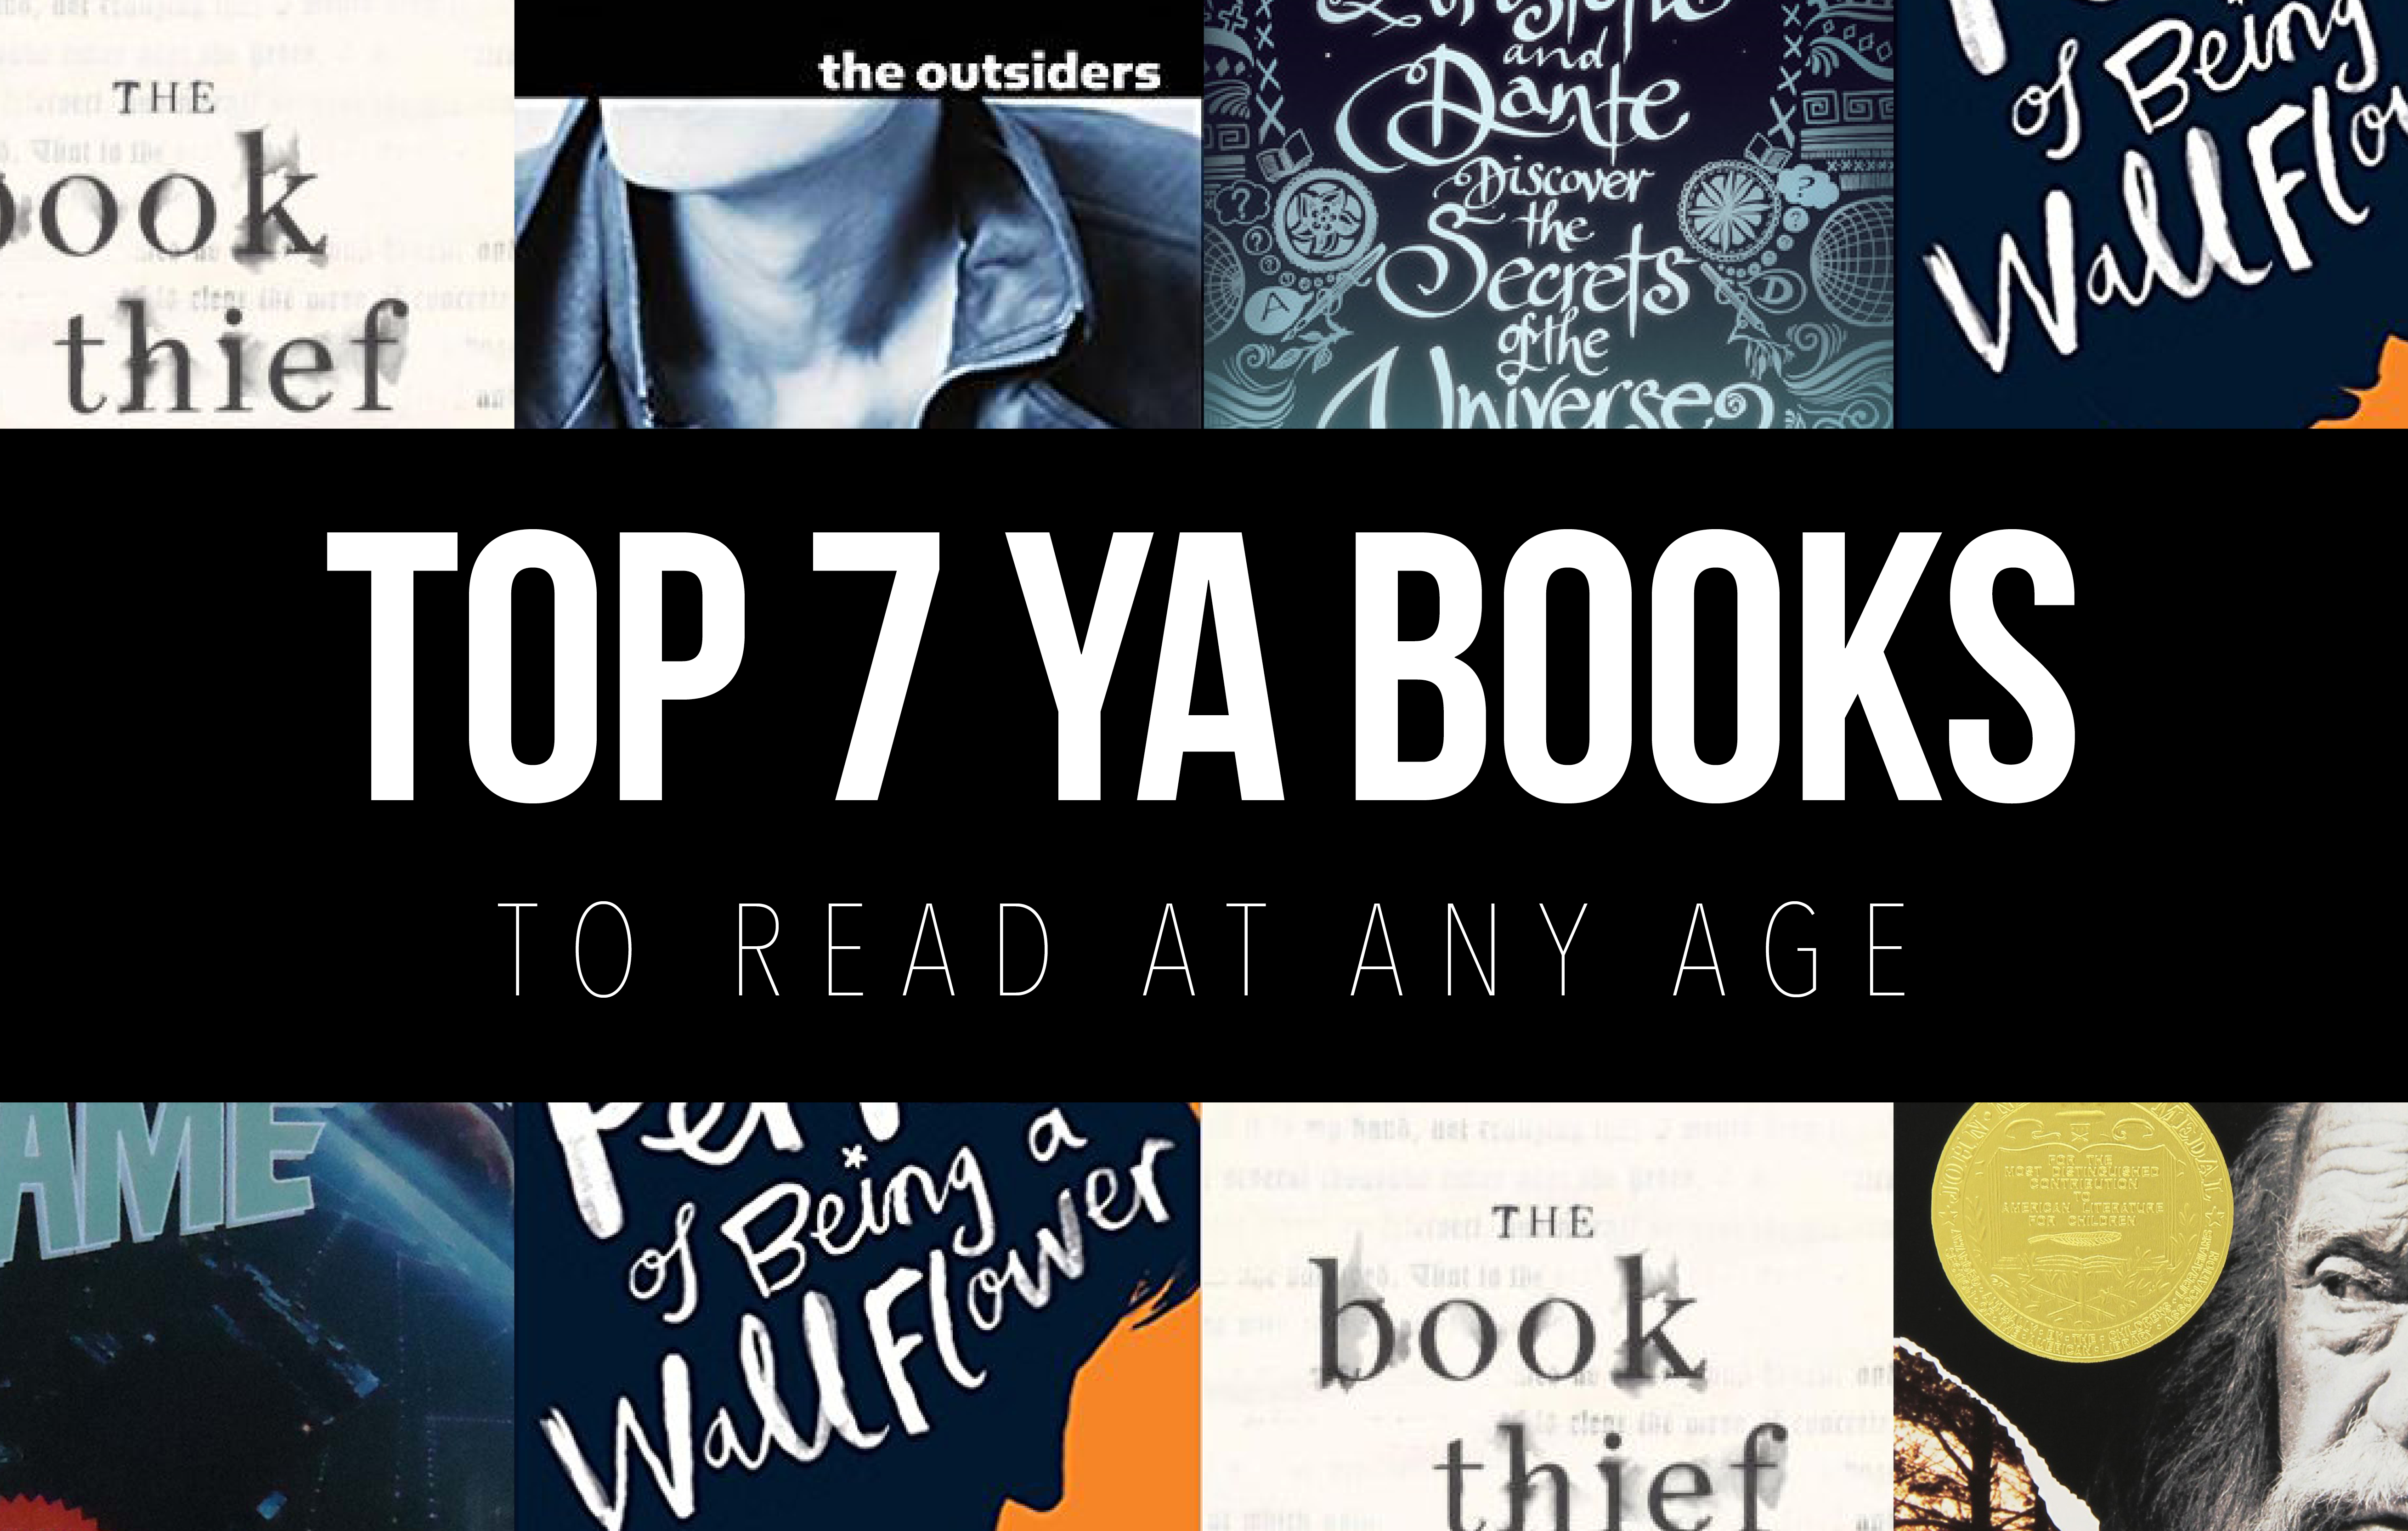 TOP 7 YA BOOKS TO READ AT ANY AGE